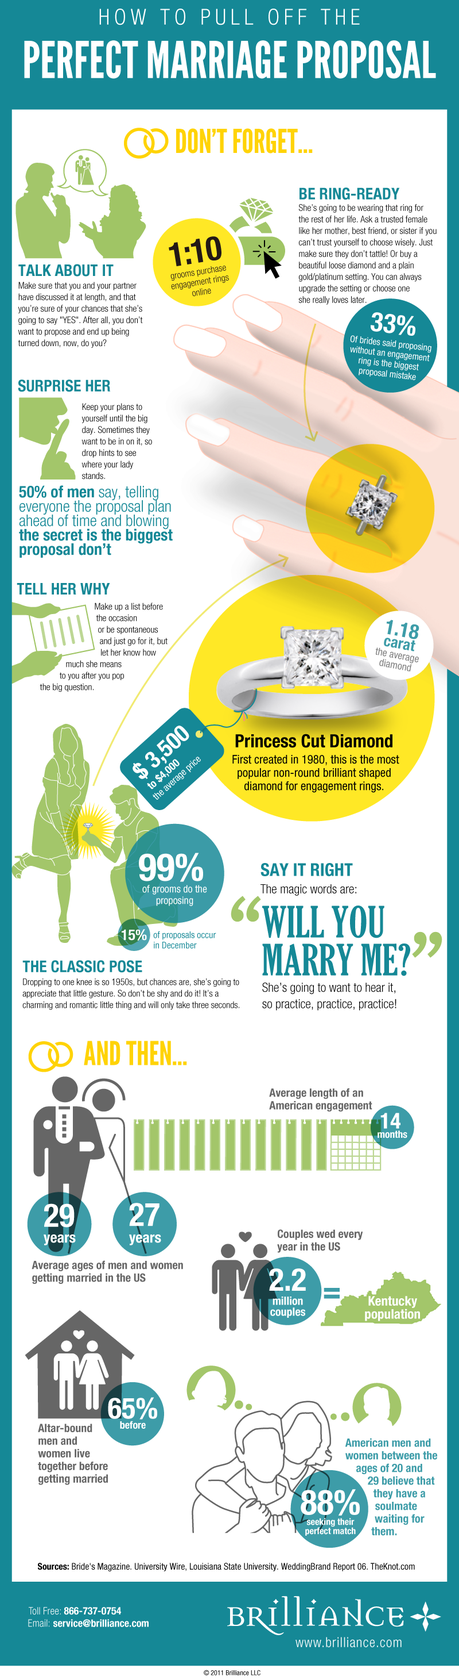 How to Propose, proposal ideas, perfect proposal, raymond lee jewelers